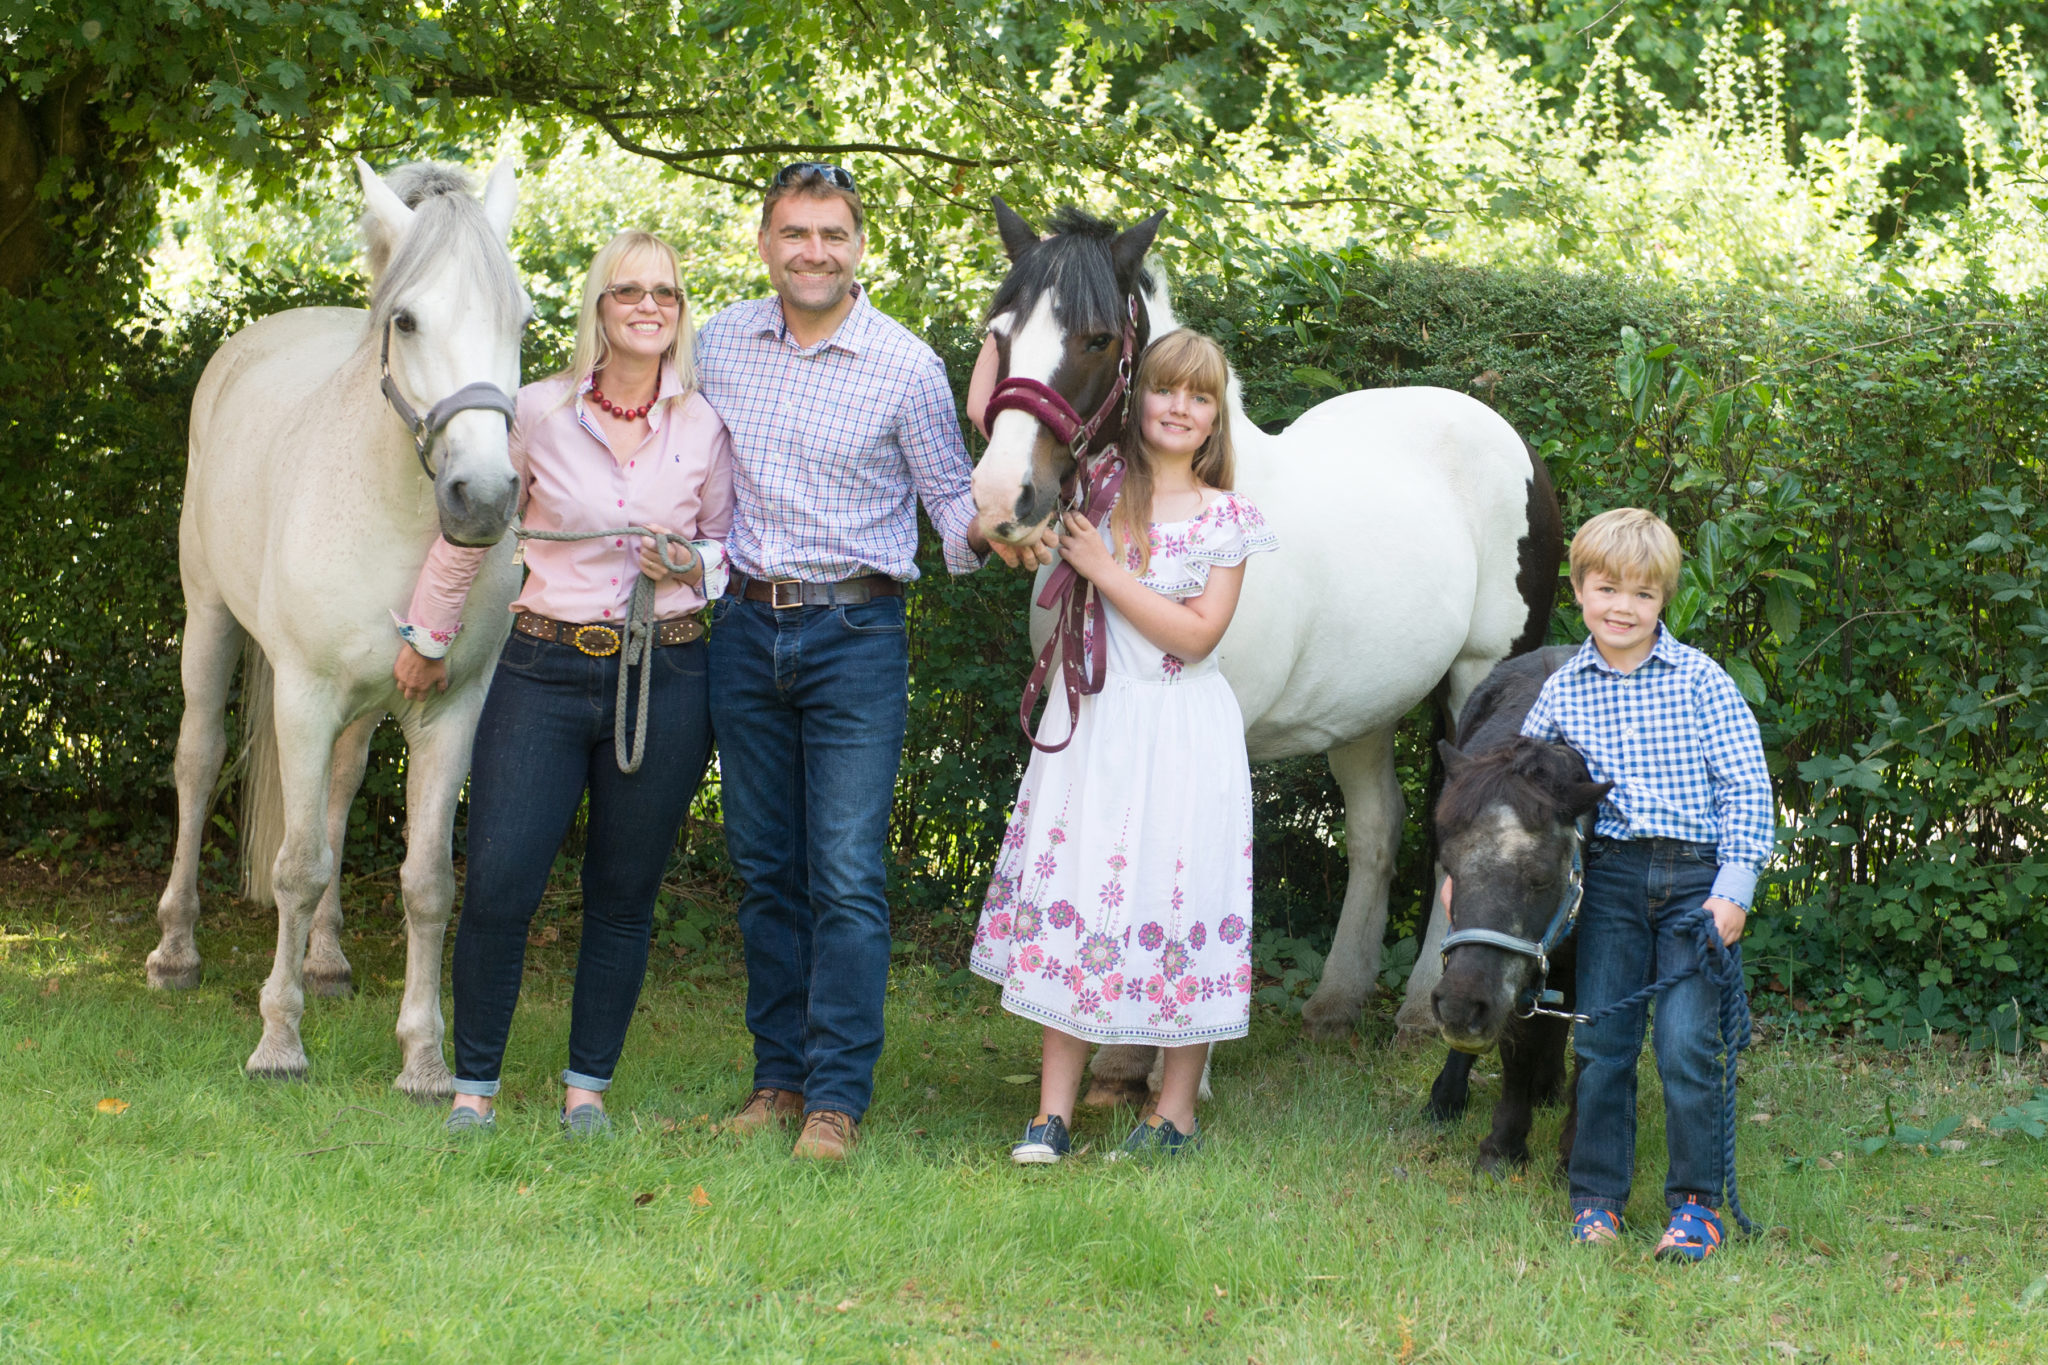 Family photograph with horses near Retford by Retford photographer in Nottinghamshire